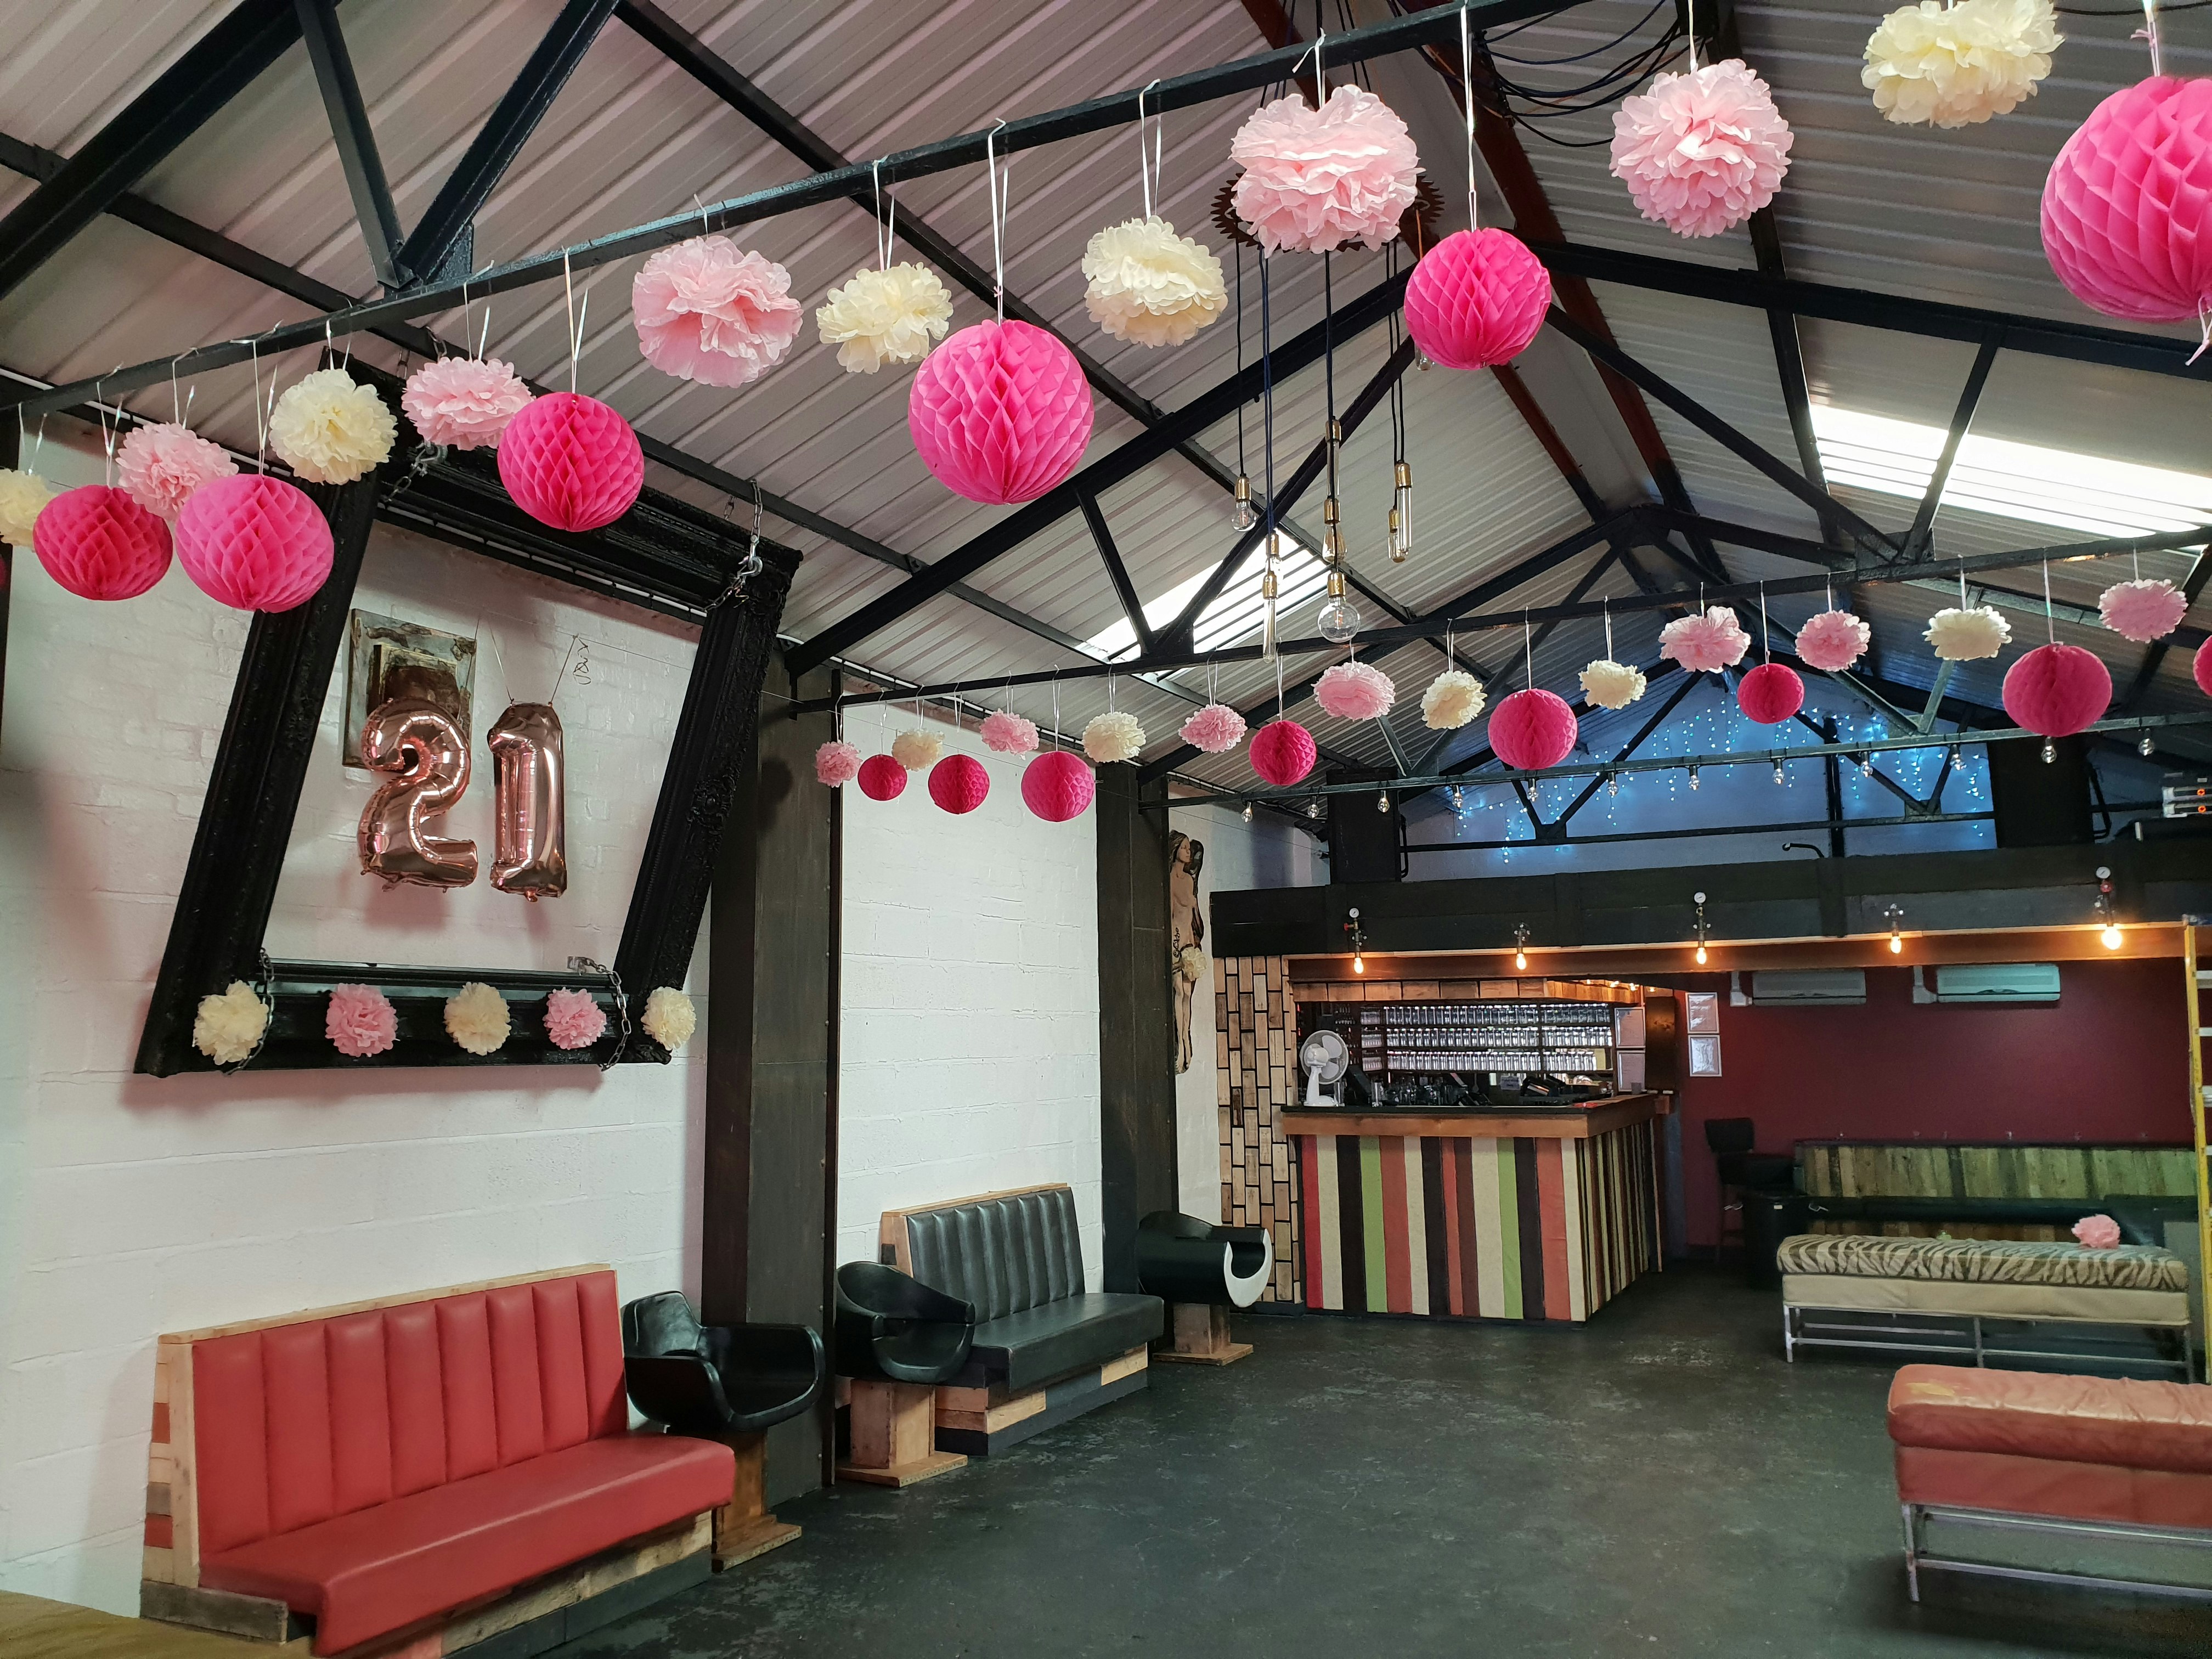 Event Venues in Digbeth - The Engine Room Digbeth